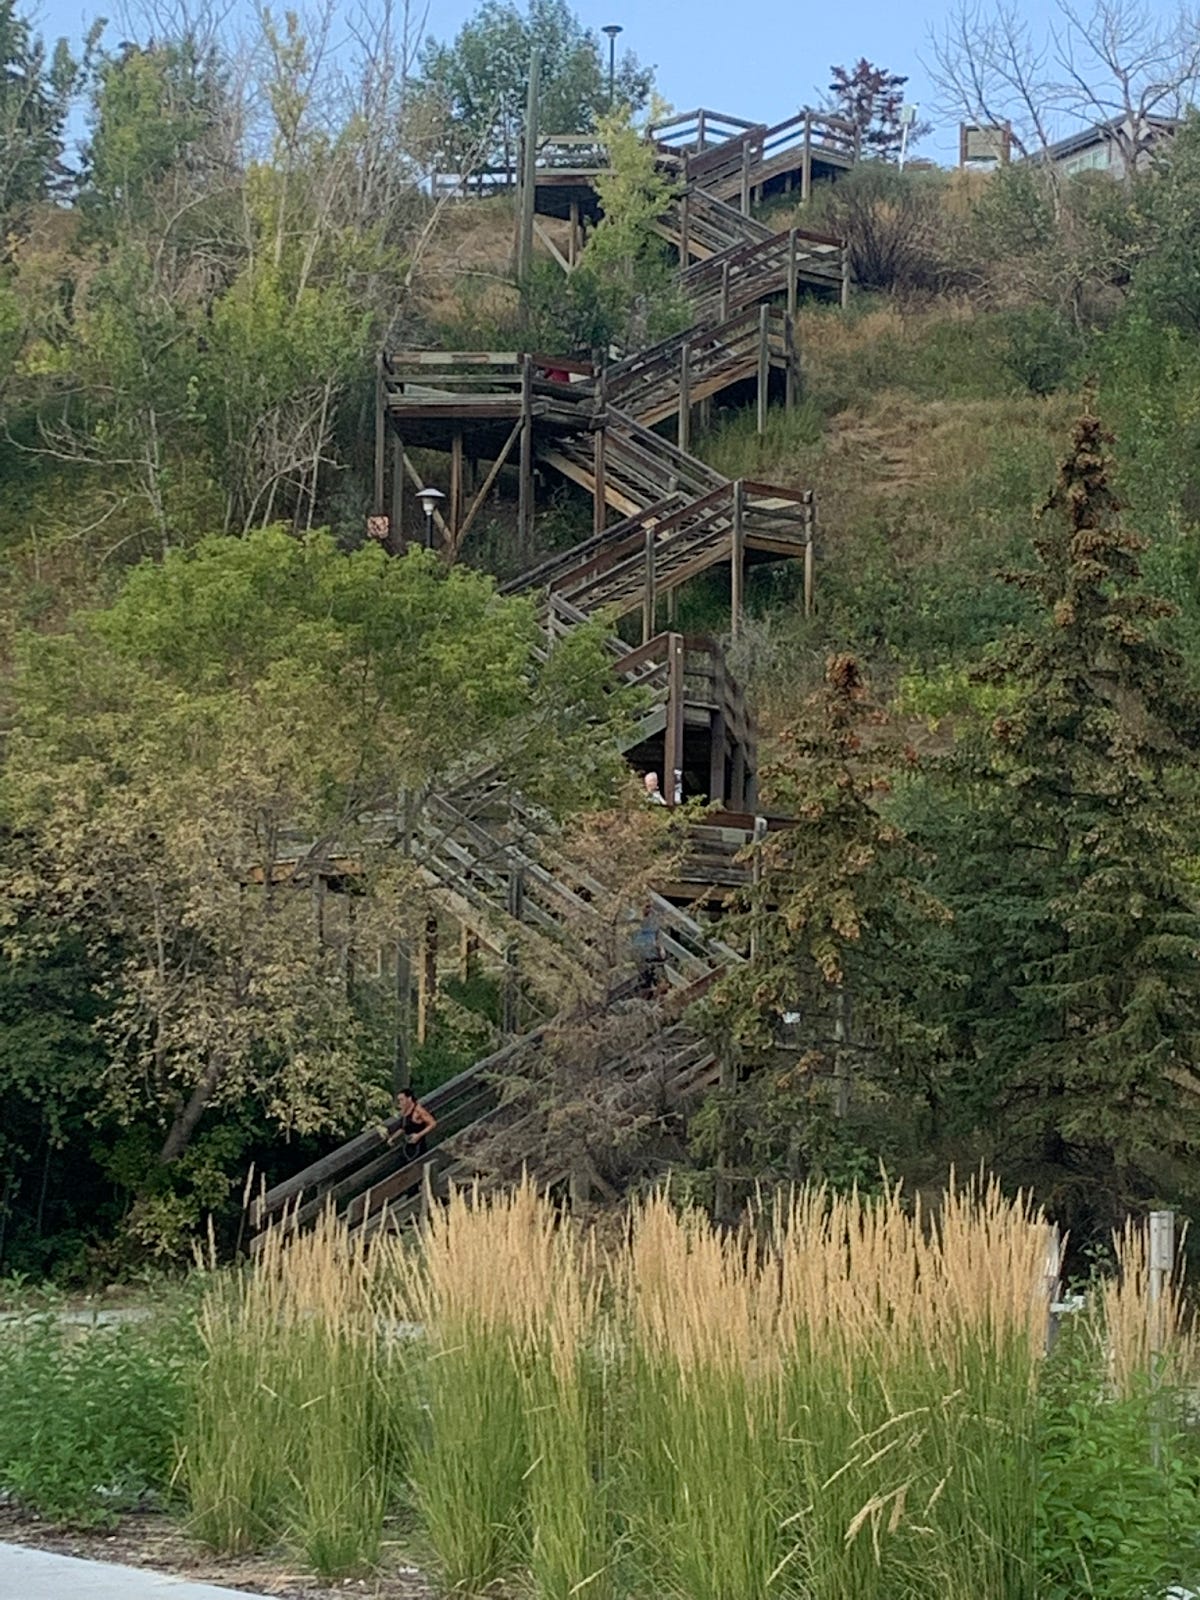 Super steep wooden staircase with many, many flights. A challenging workout!